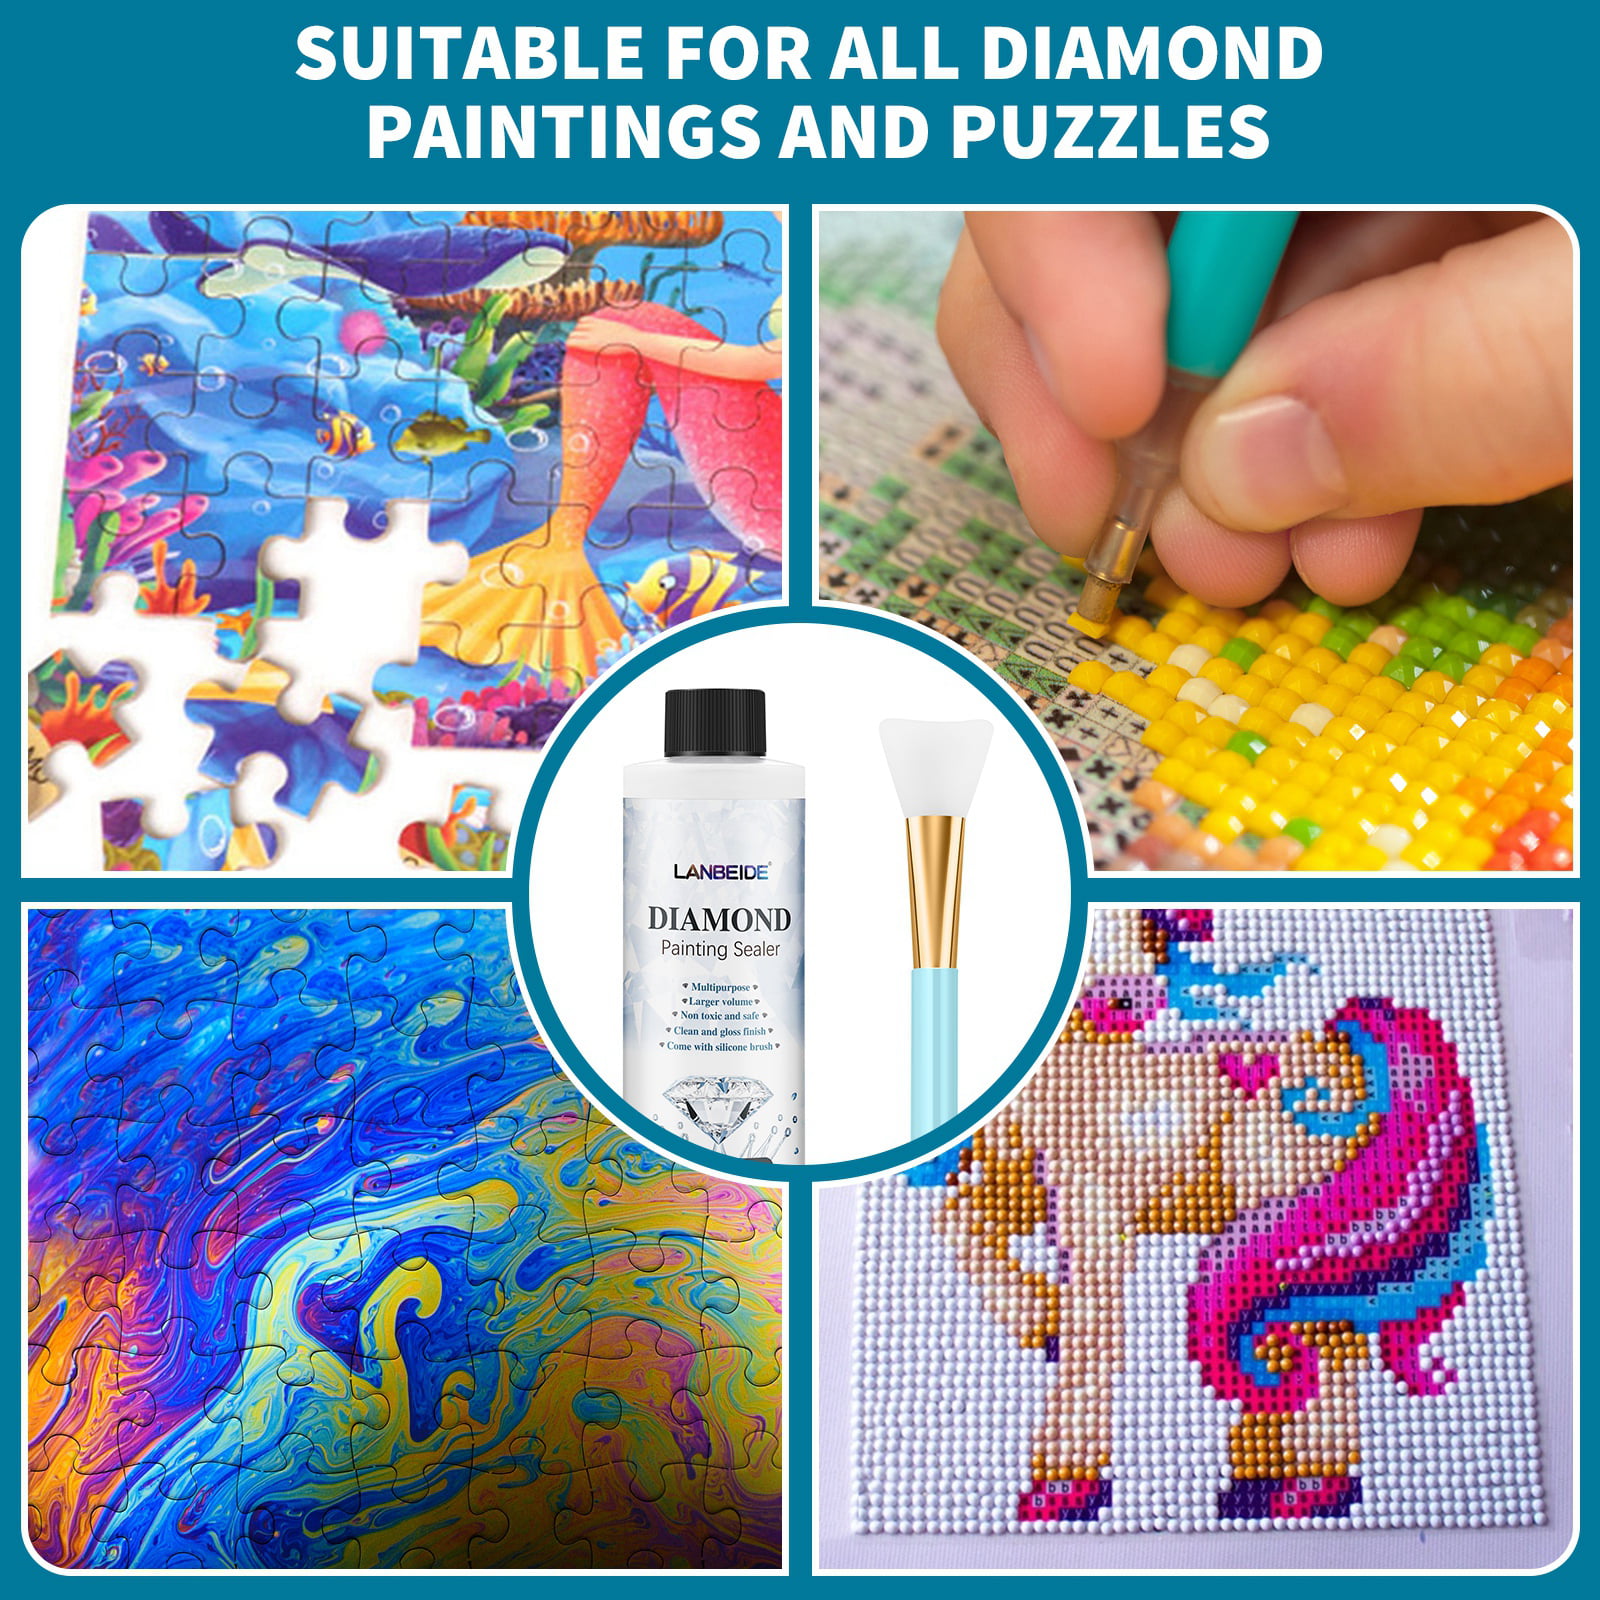 Eitseued 2 Pack 240ML Diamond Painting Sealer,Diamond Painting Glue with  Sponge Head,5D Diamond Painting Glue Permanent Hold & Shine Effect,DIY